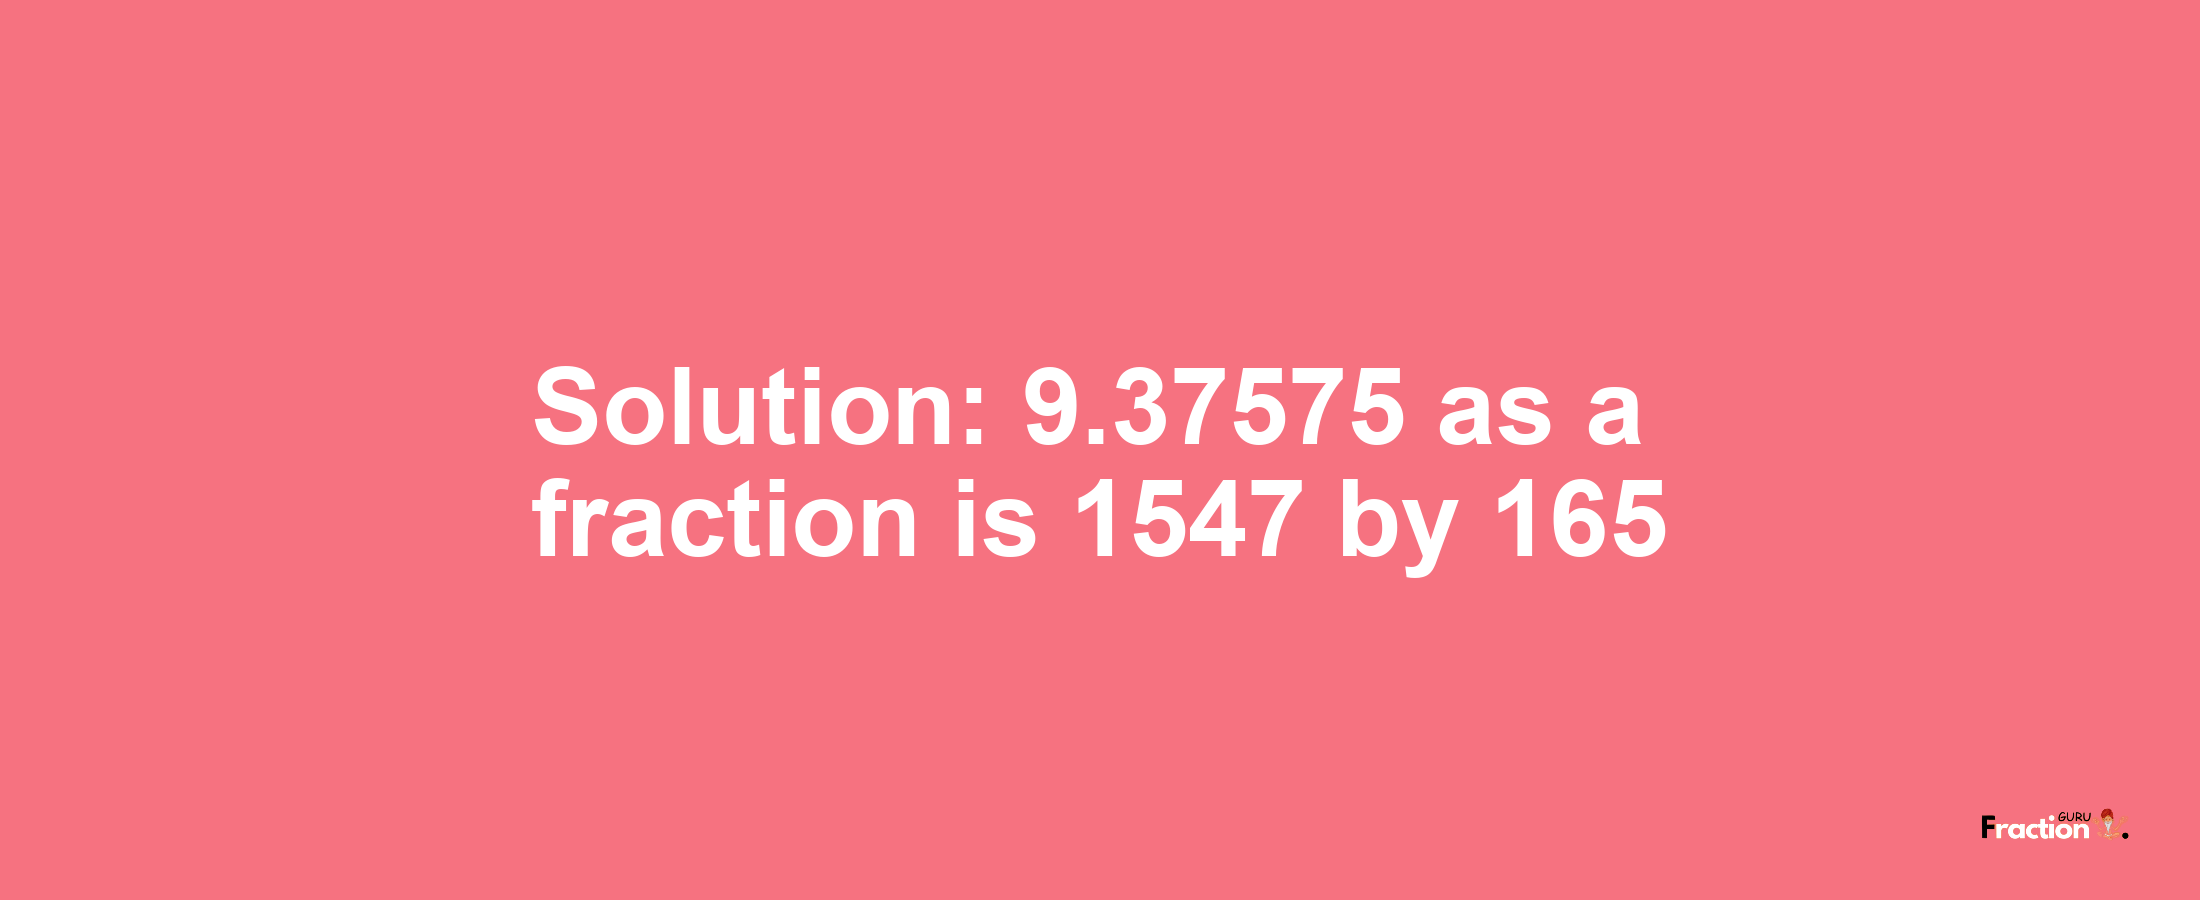 Solution:9.37575 as a fraction is 1547/165